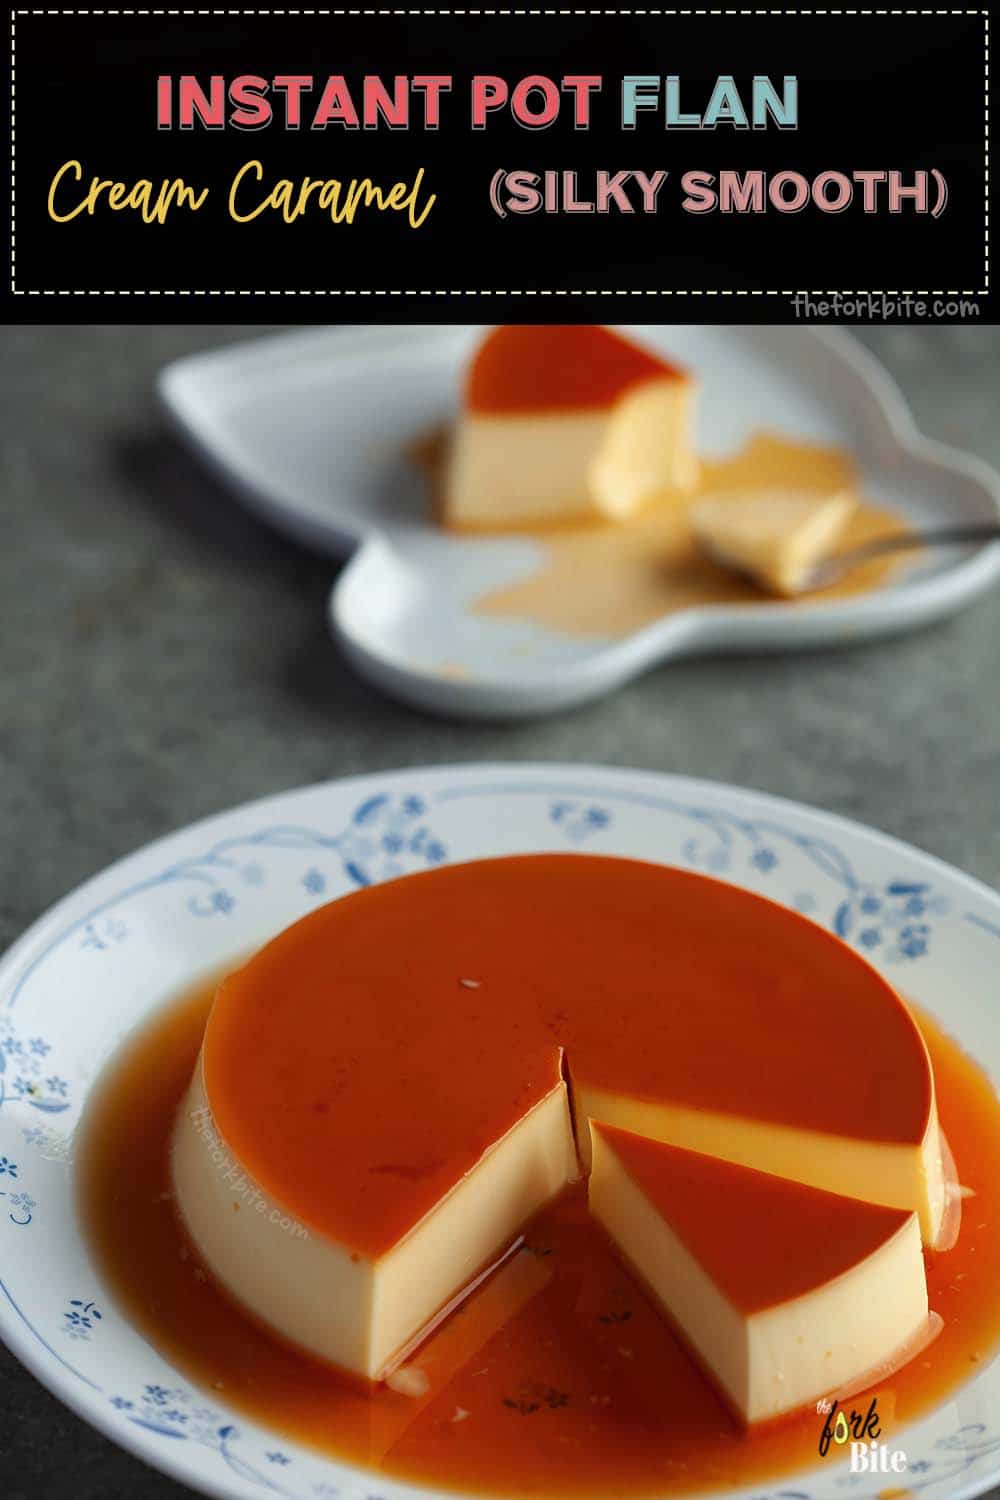 Fall in love with this silky smooth texture Instant Pot Flan. It's creamy egg and velvety texture, melt in the mouth smoothness – sheer paradise.